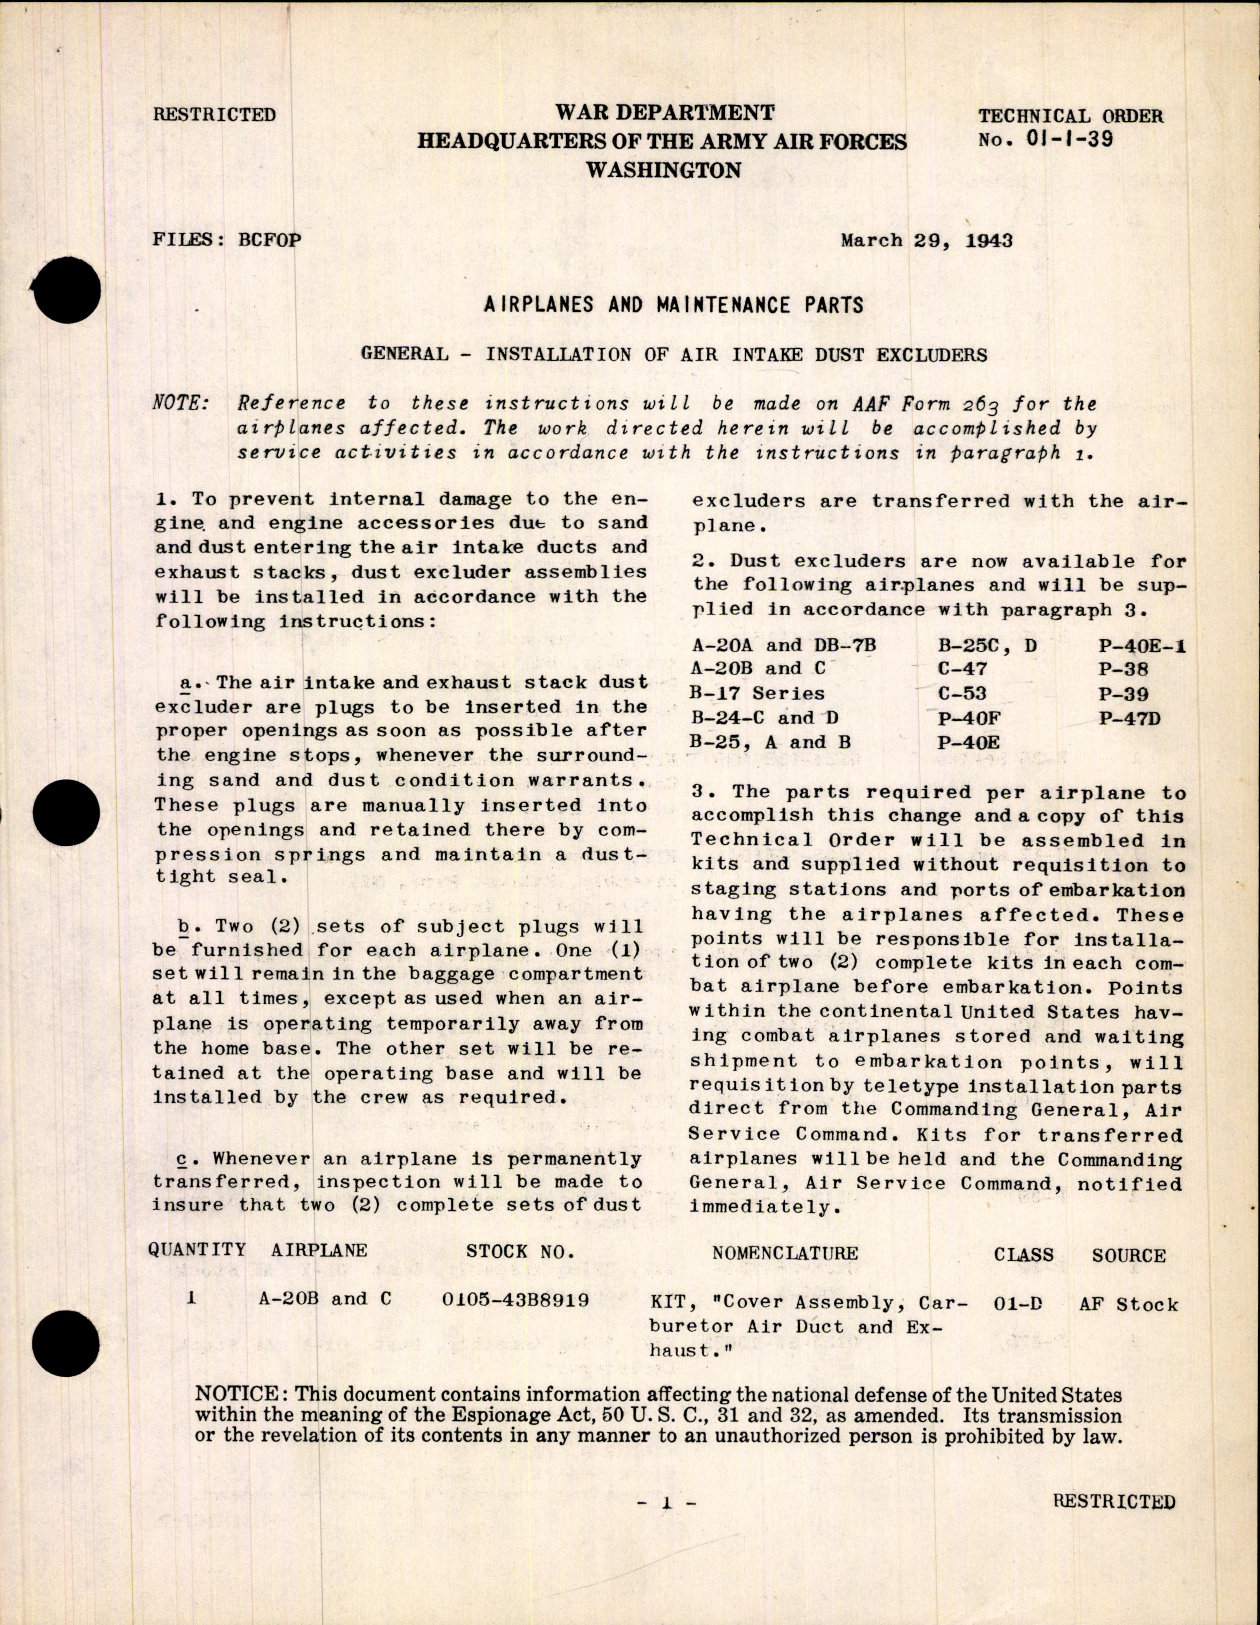 Sample page 1 from AirCorps Library document: Airplanes and Maintenance Parts for Installation of Air Intake Dust Excluders